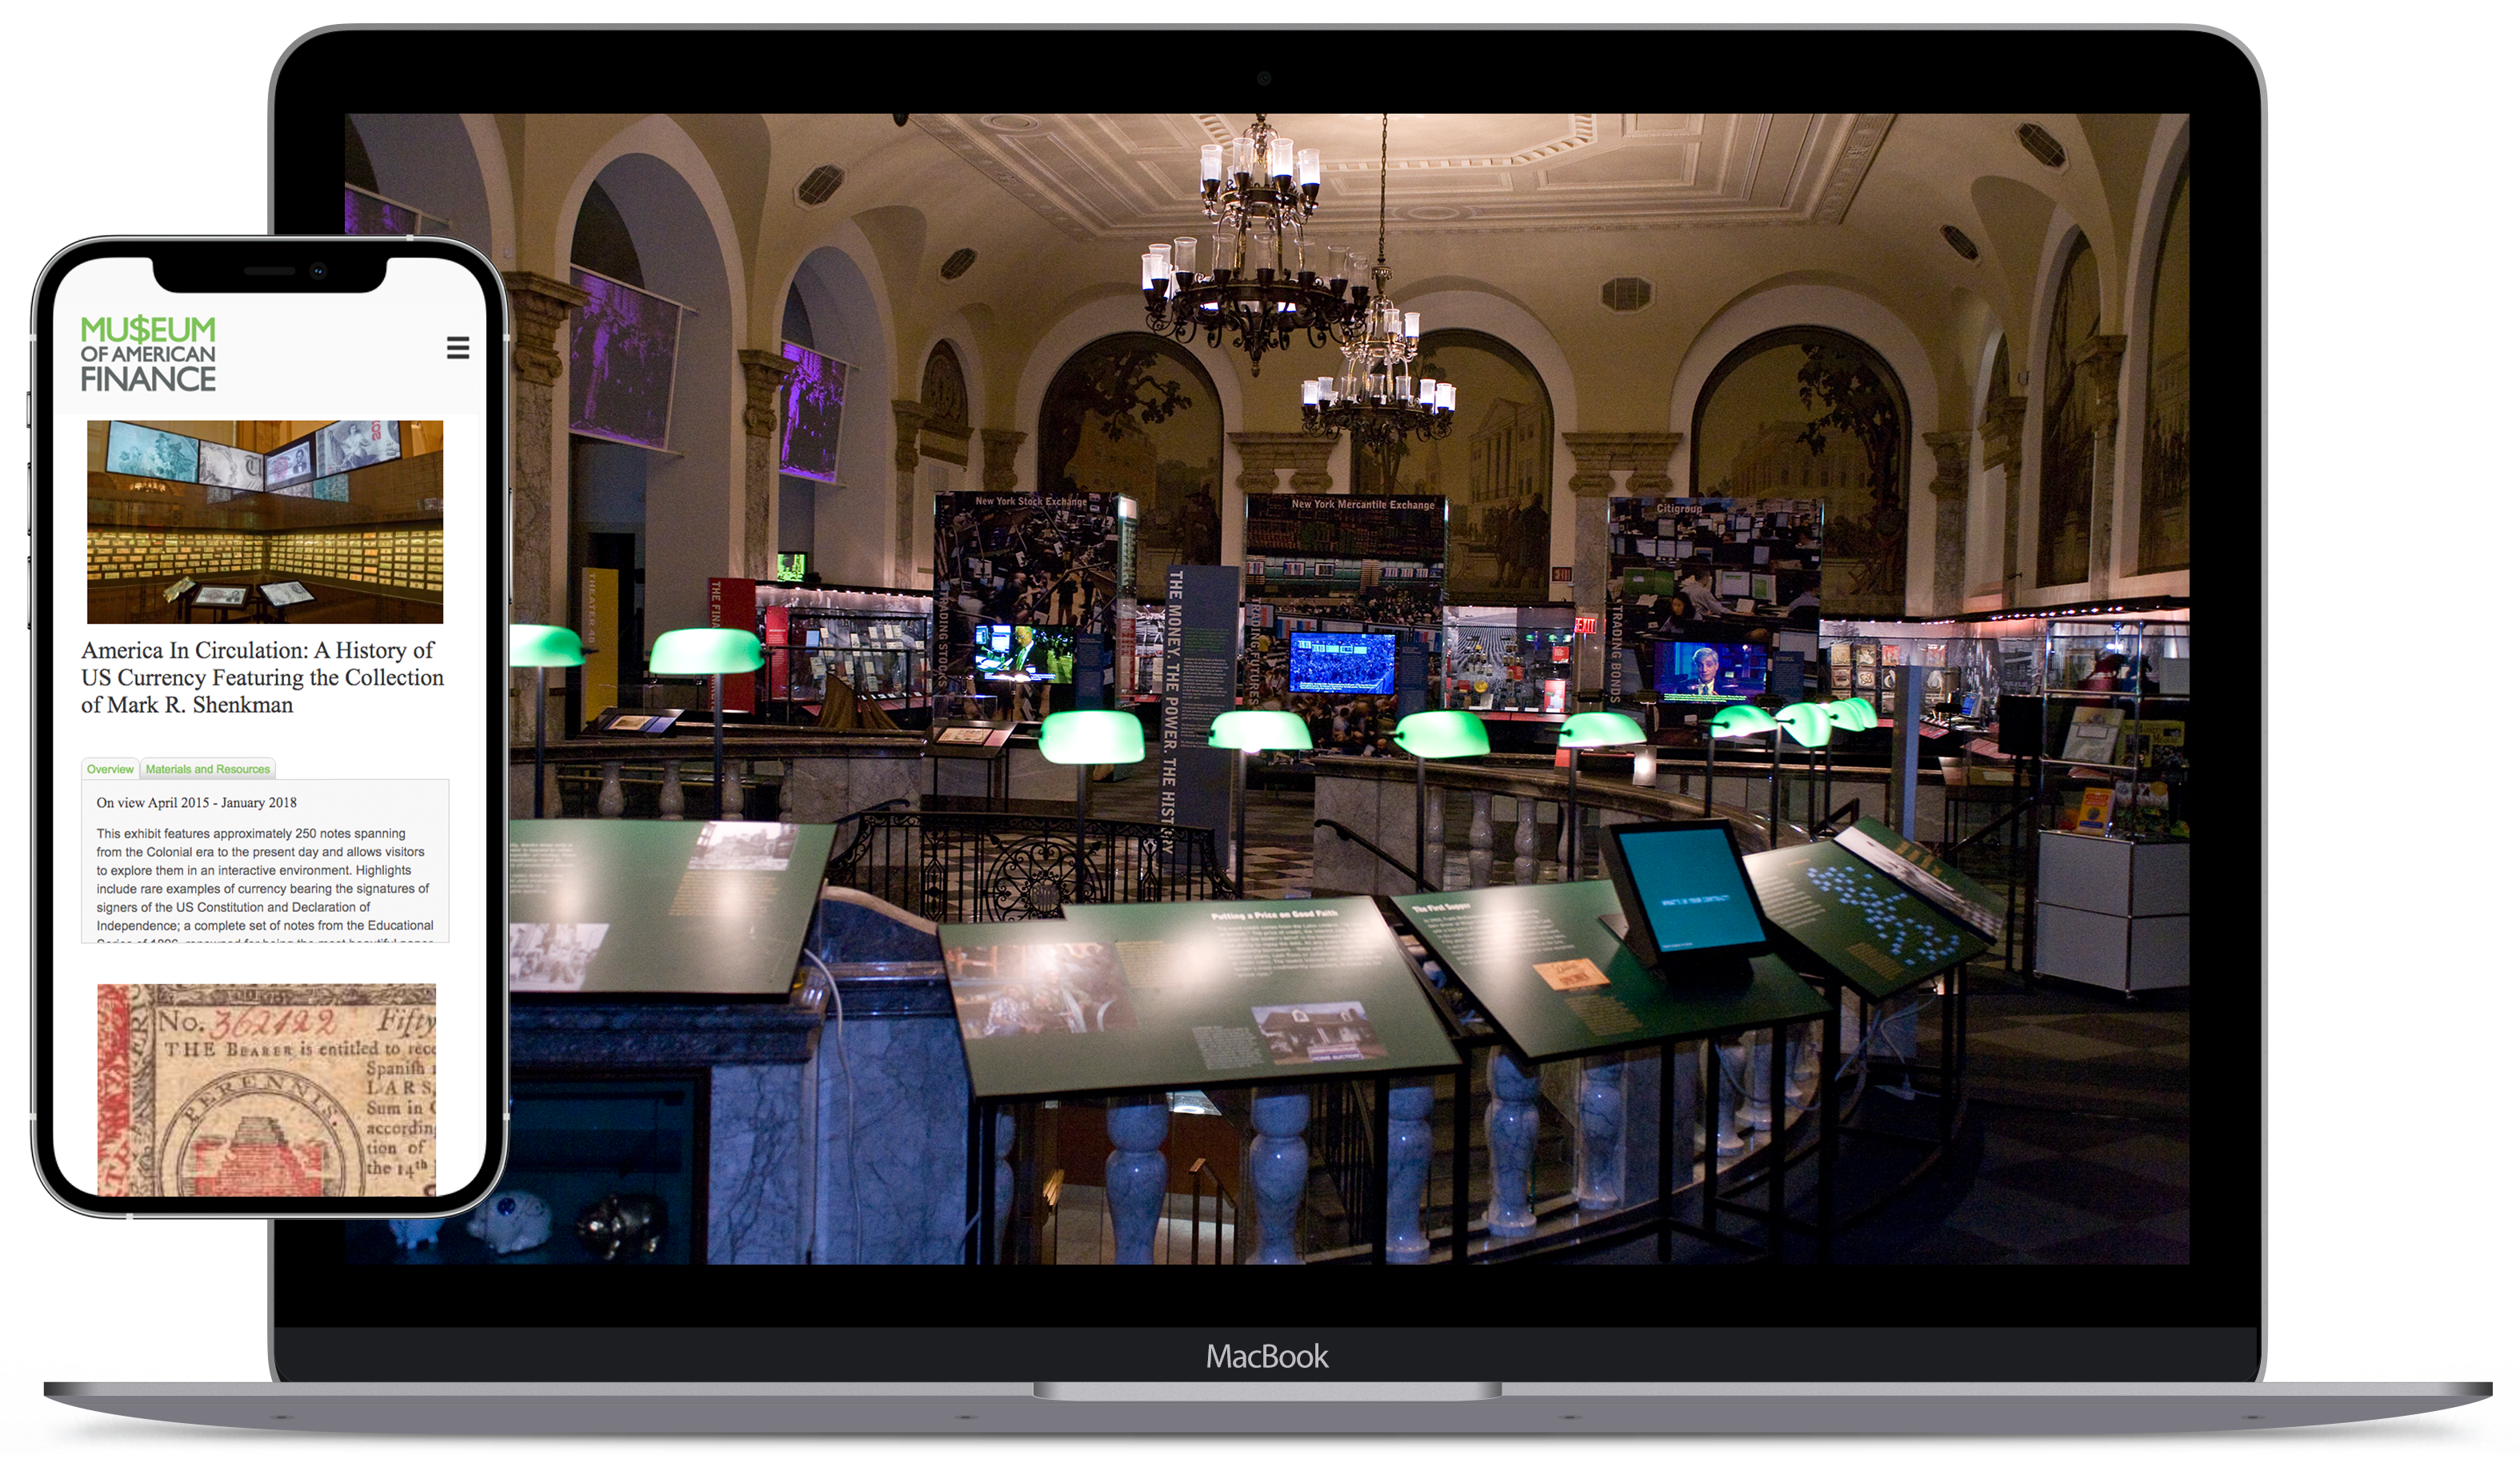 Mockups of the Museum of American Finance coverage shown on a MacBook and mobile device.